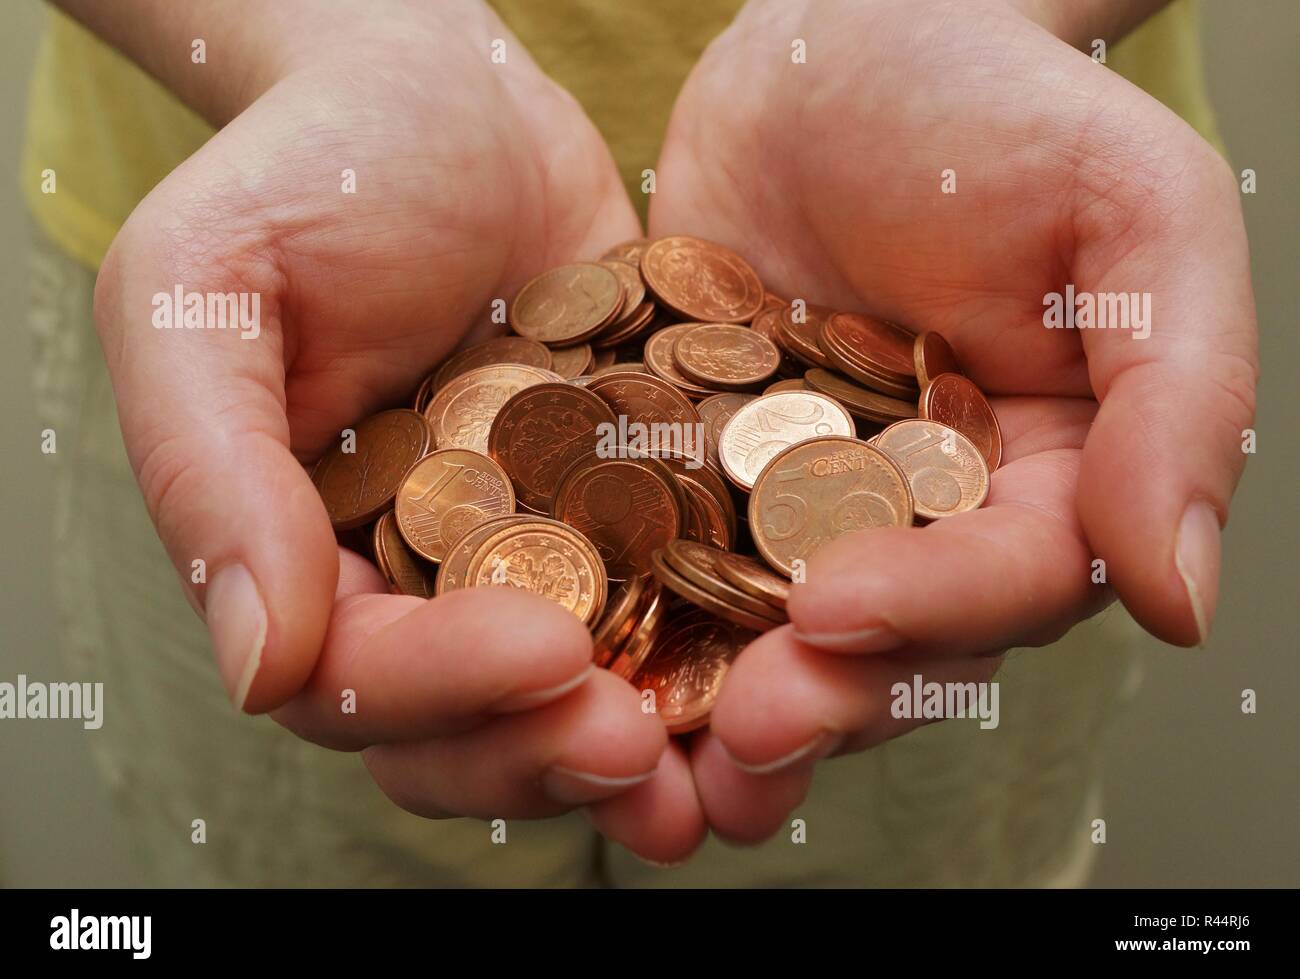 woman holding a small amount of money in their hands Stock Photo